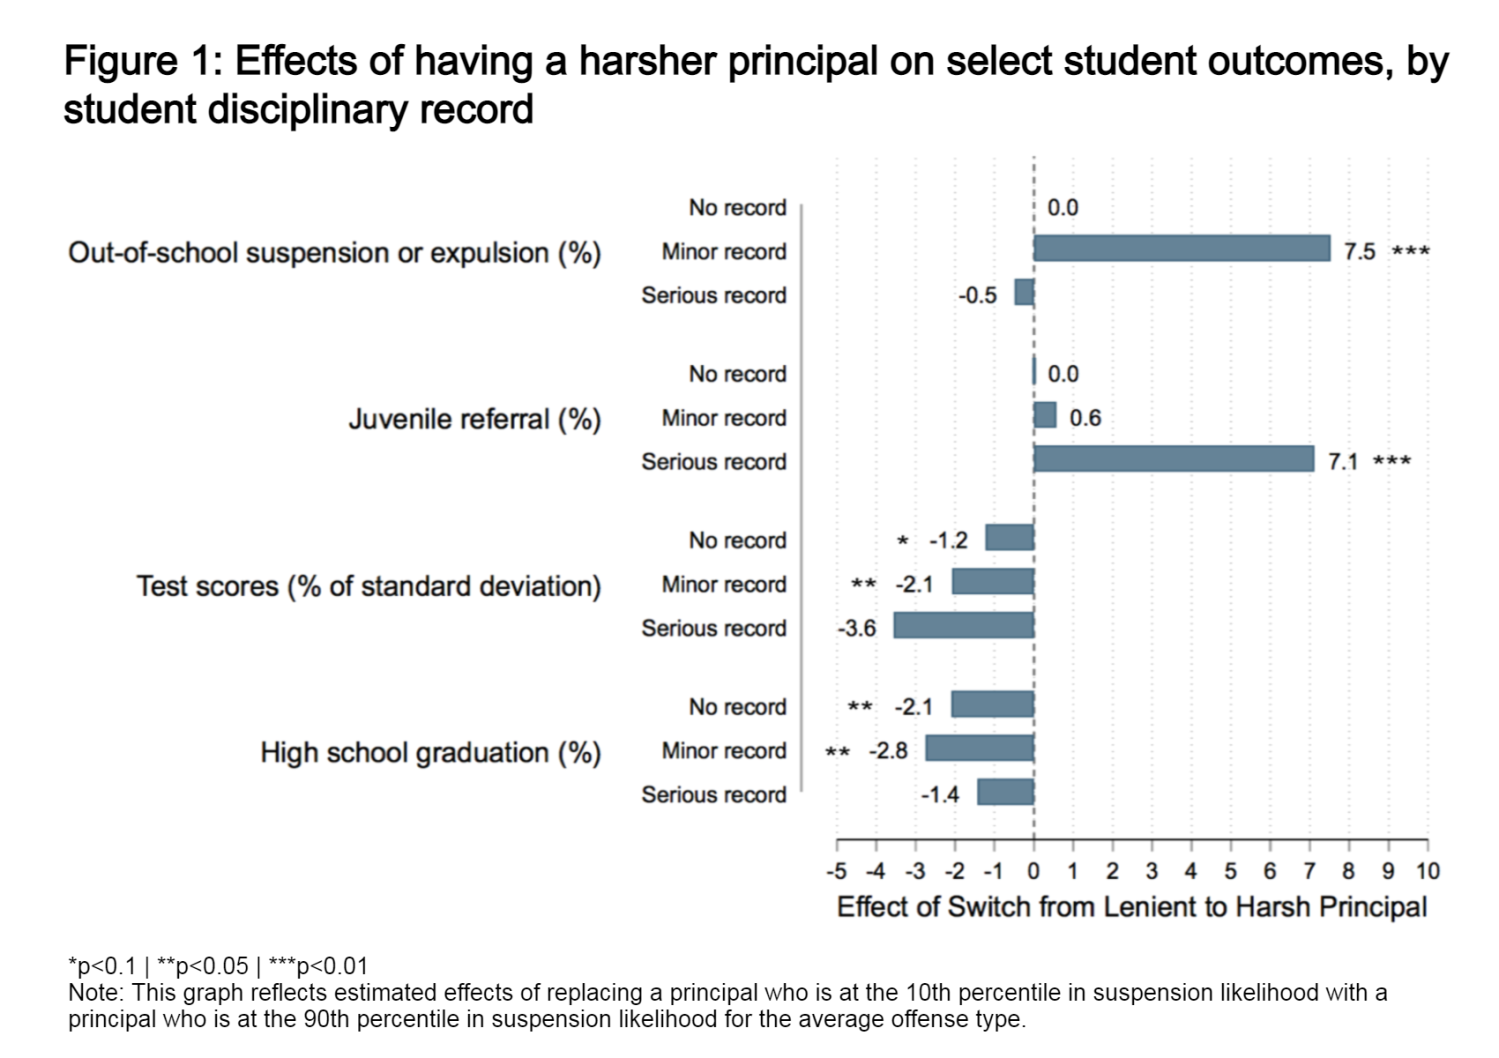 Effects of having a harsher principal on select student outcomes, by student disciplinary record